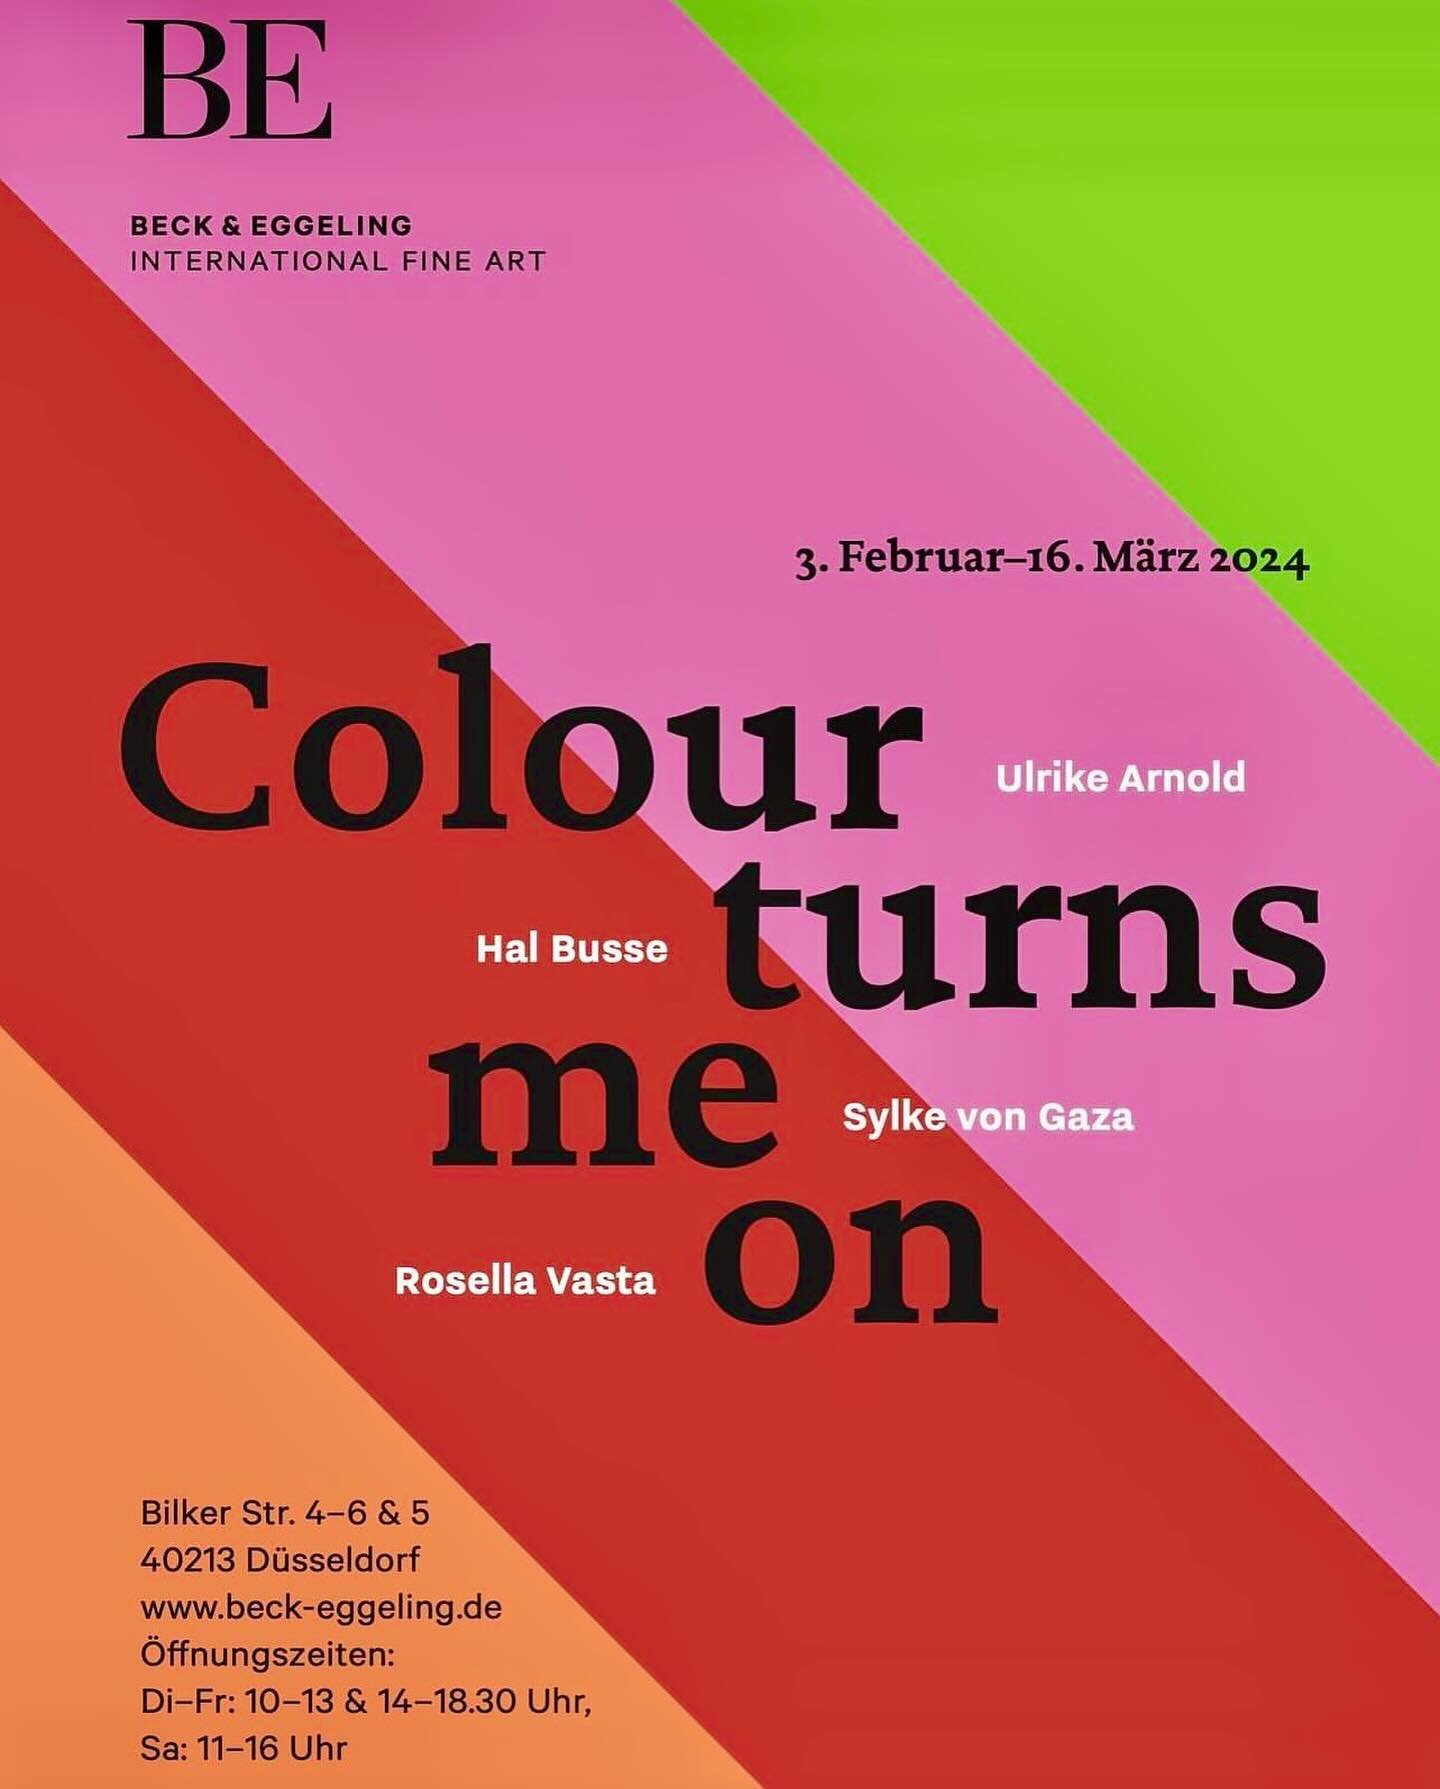 Colour turns me on. 🌈 🎨 🖌️

The exhibition &ldquo;Colour turns me on&rdquo; at Gallery Beck &amp; Eggeling International Fine Art in D&uuml;sseldorf is a vivid celebration of Color Field painting, marking the gallery&rsquo;s 30th anniversary. It p